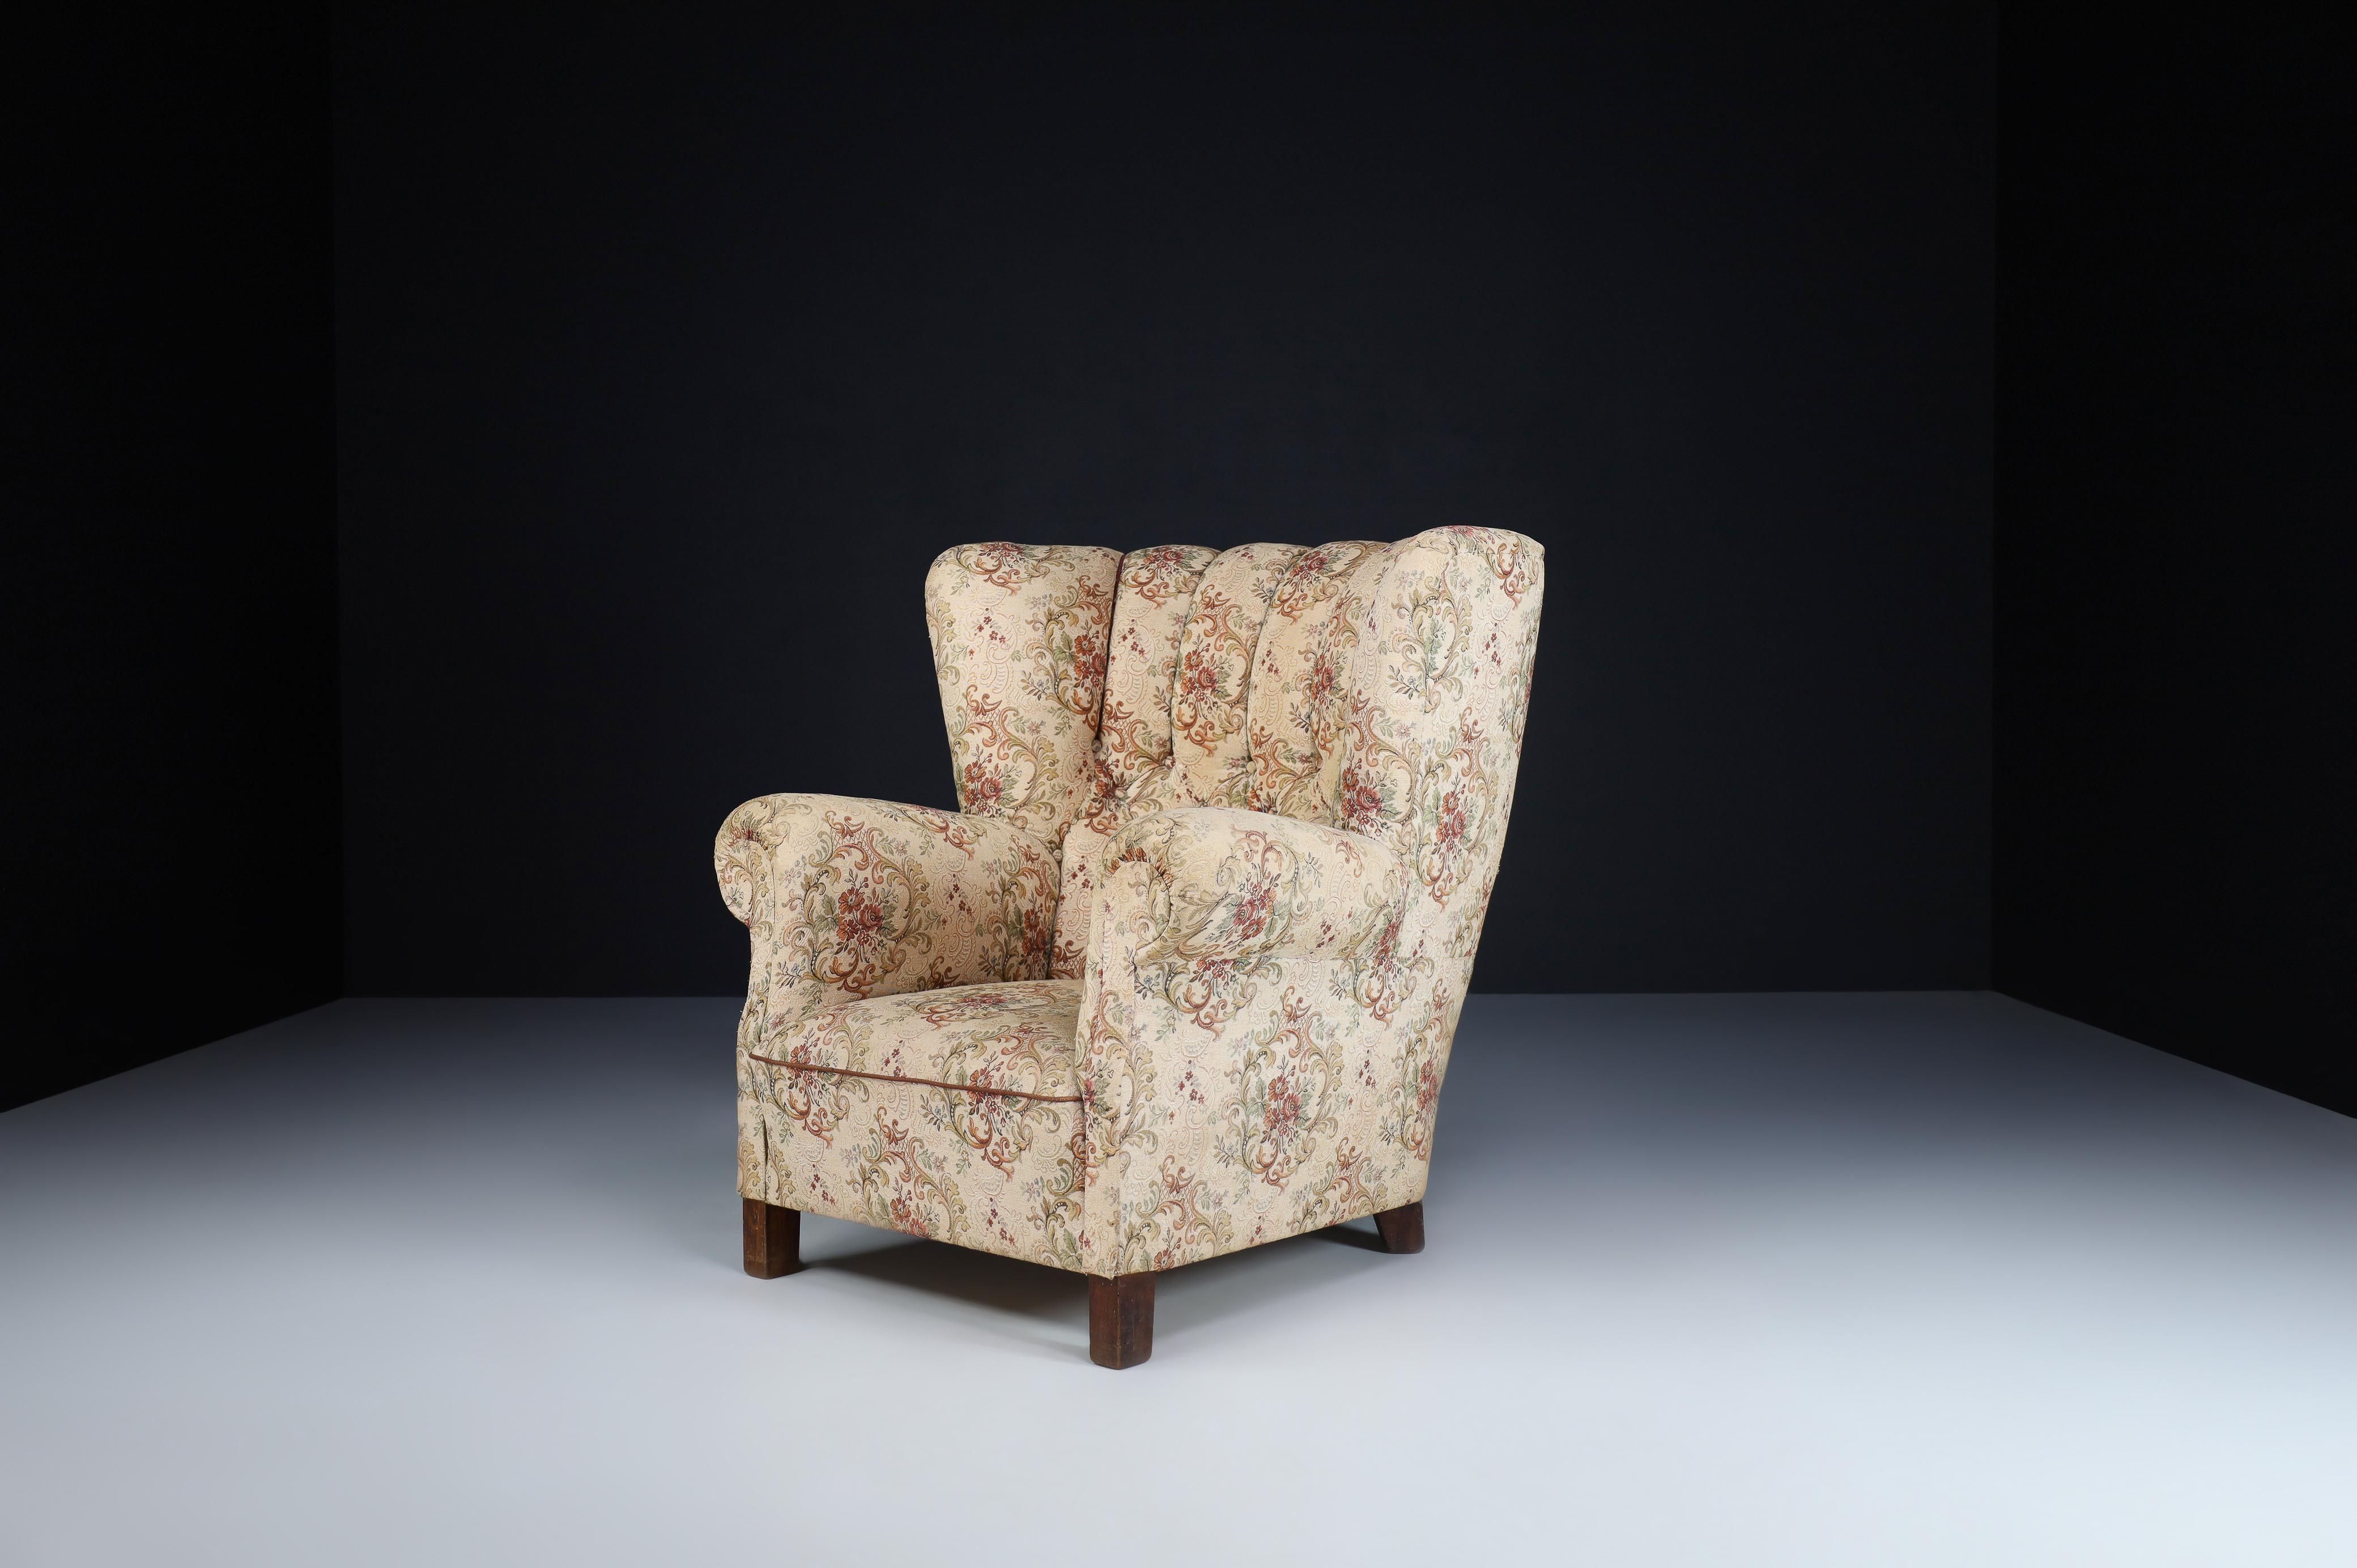 
Large Art Deco armchair in original floral fabric Prague 1930s.

Particular large armchair in original floral made in Prague and production of the 1930s in Art Deco style. Thanks to its elegant armrests and seating, the large armchair gets a